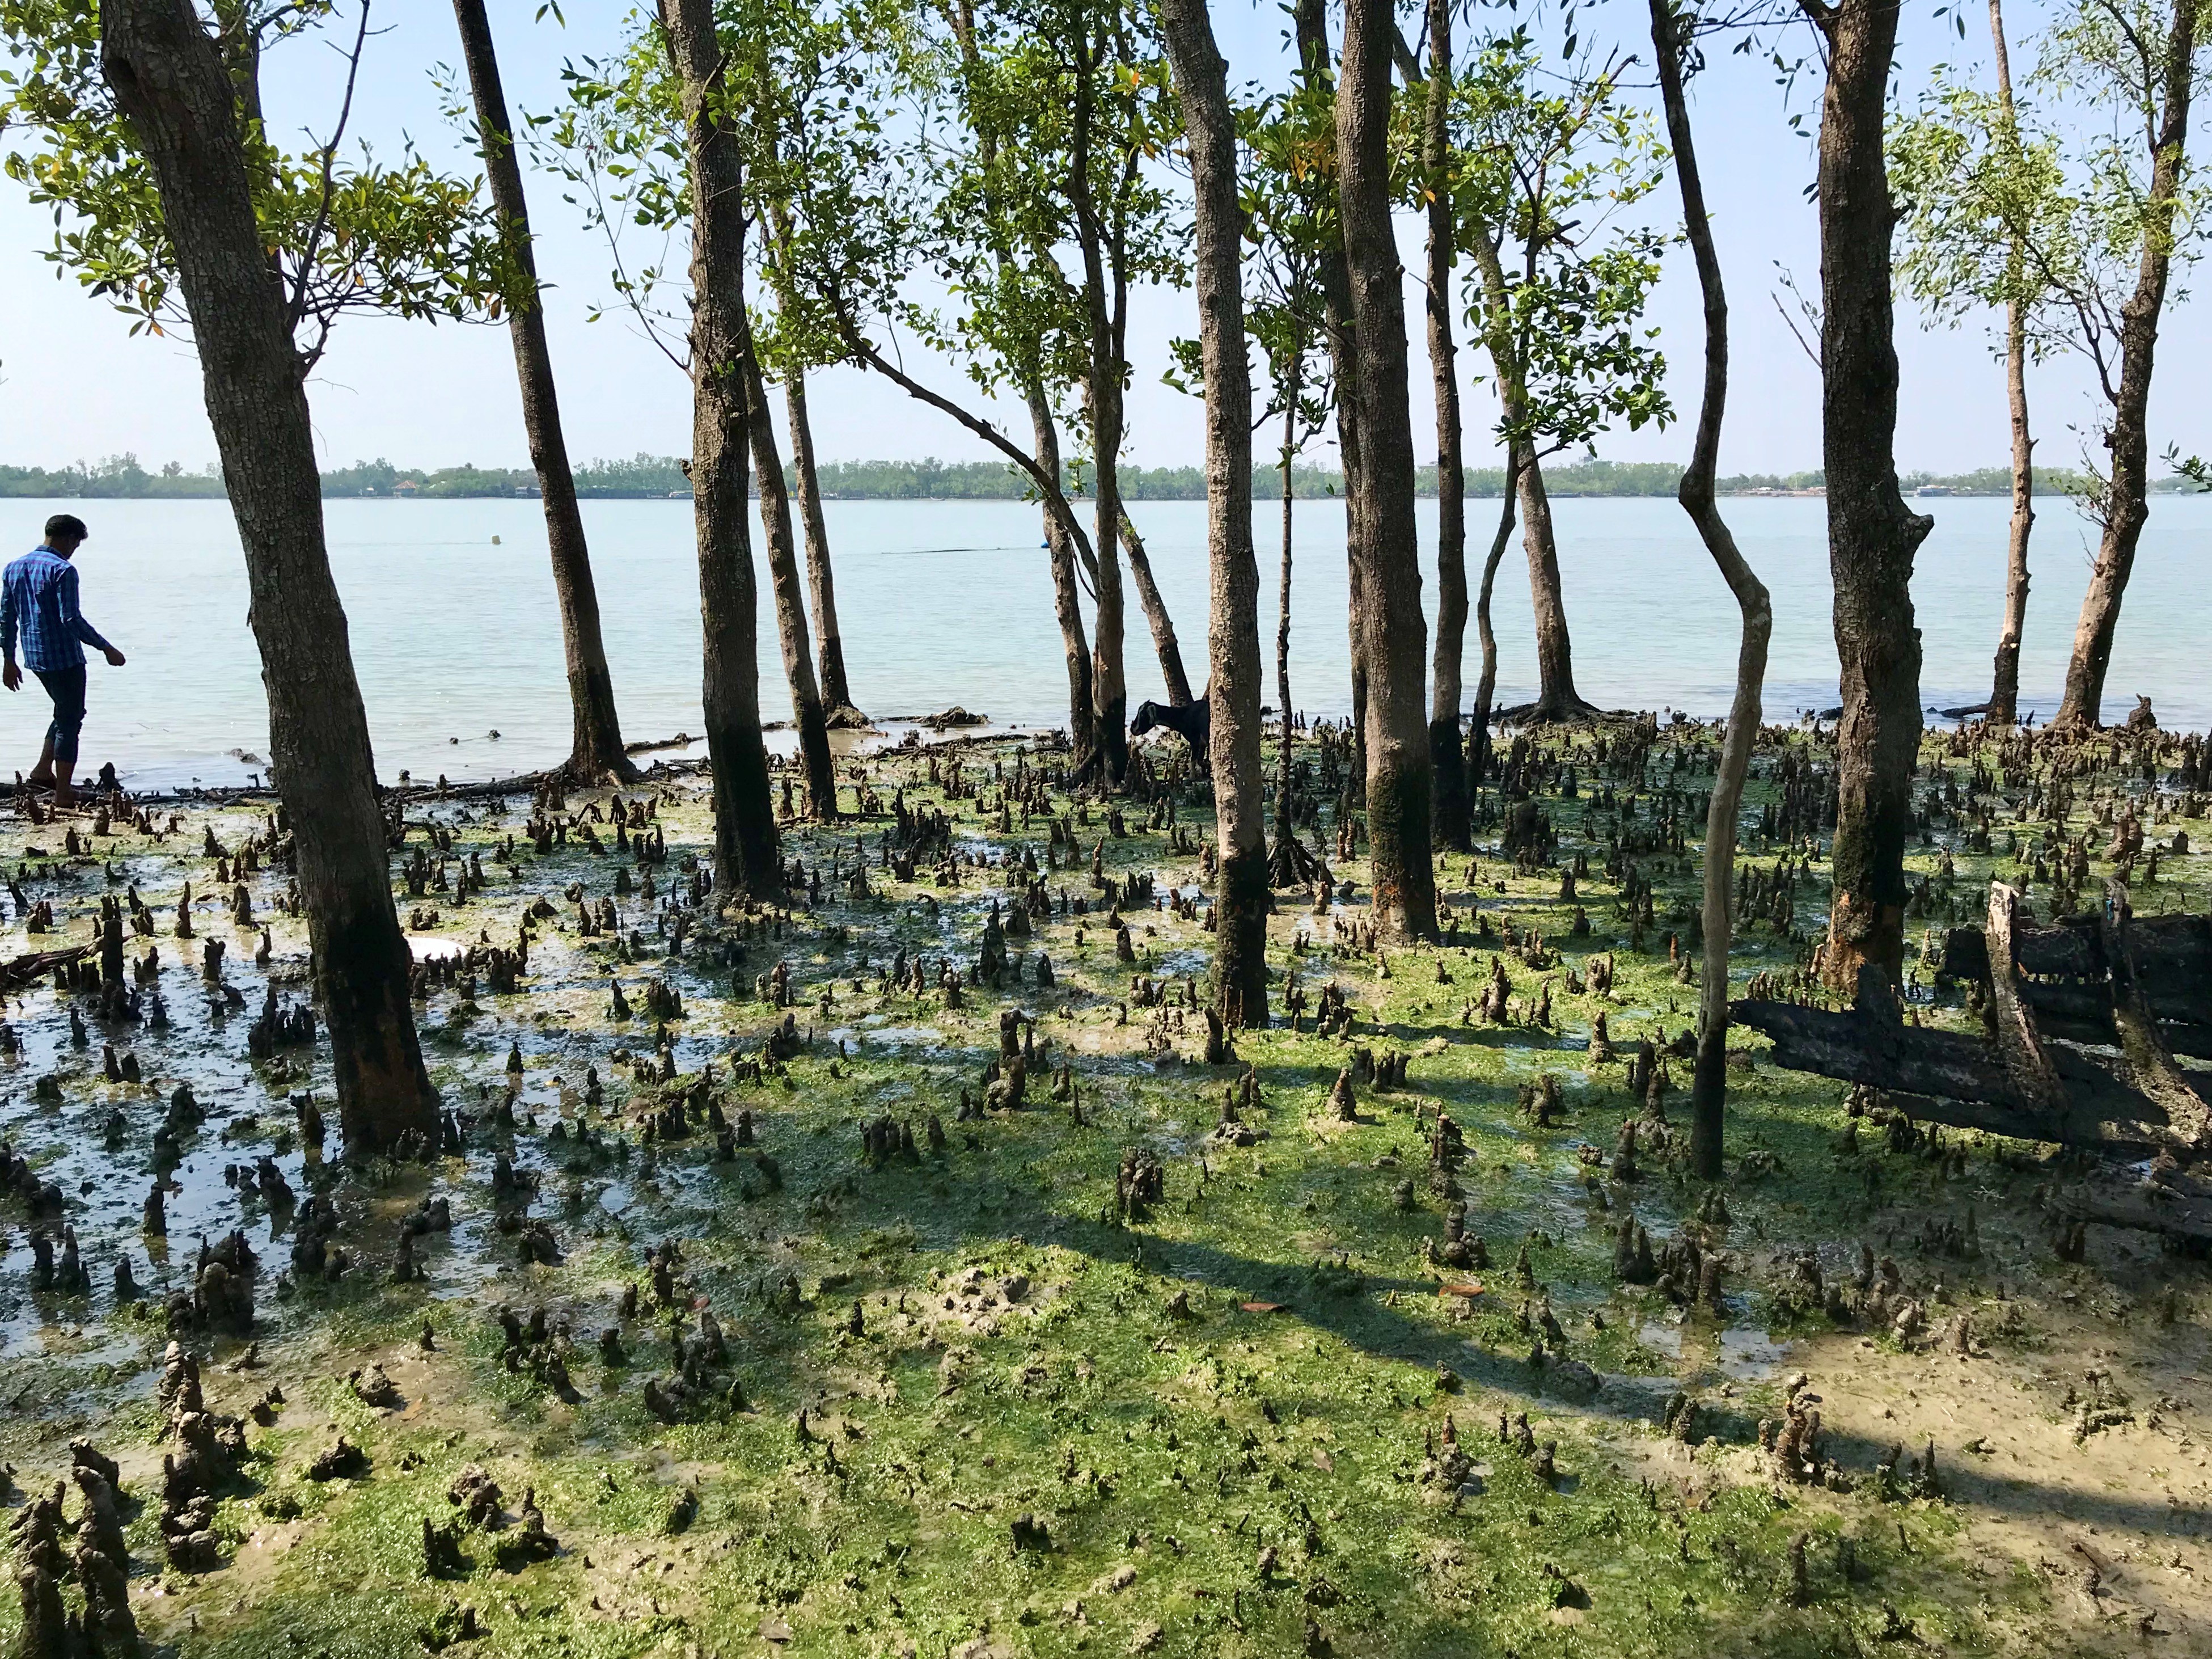 A person at the edge of the sea with trees and destroyed trees all around